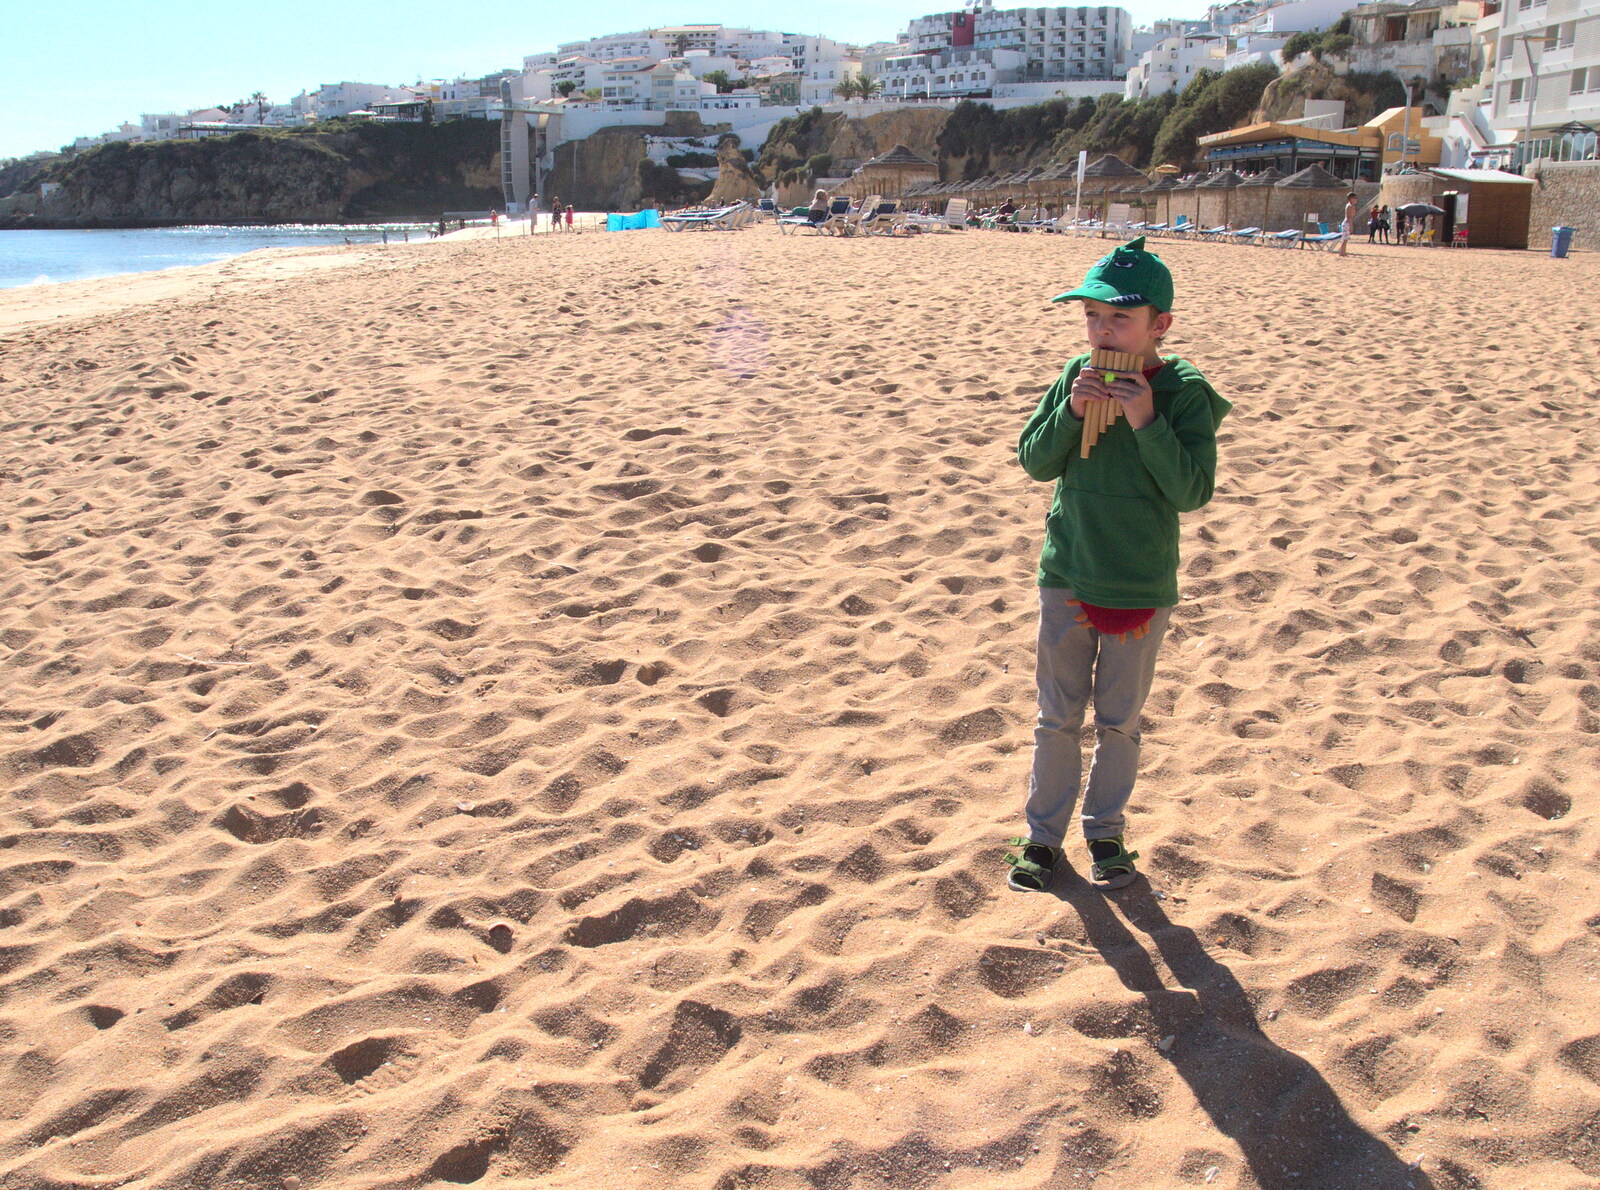 Fred plays Pan pipes from Last Days and the Journey Home, Albufeira, Portugal - 9th April 2016